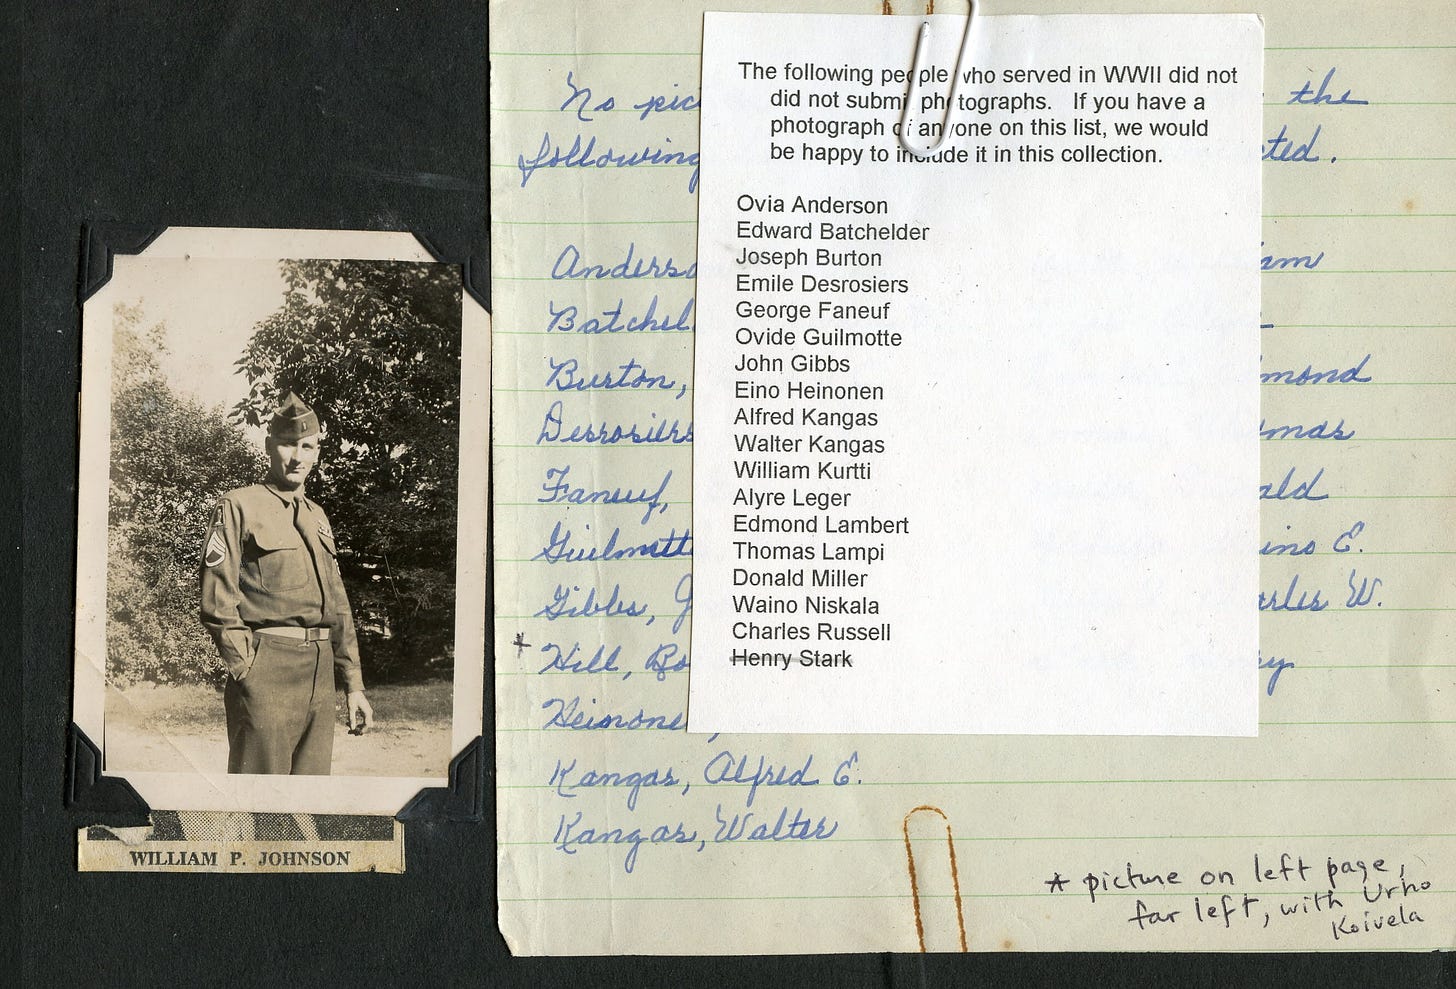 Missing photos for these WWII veterans